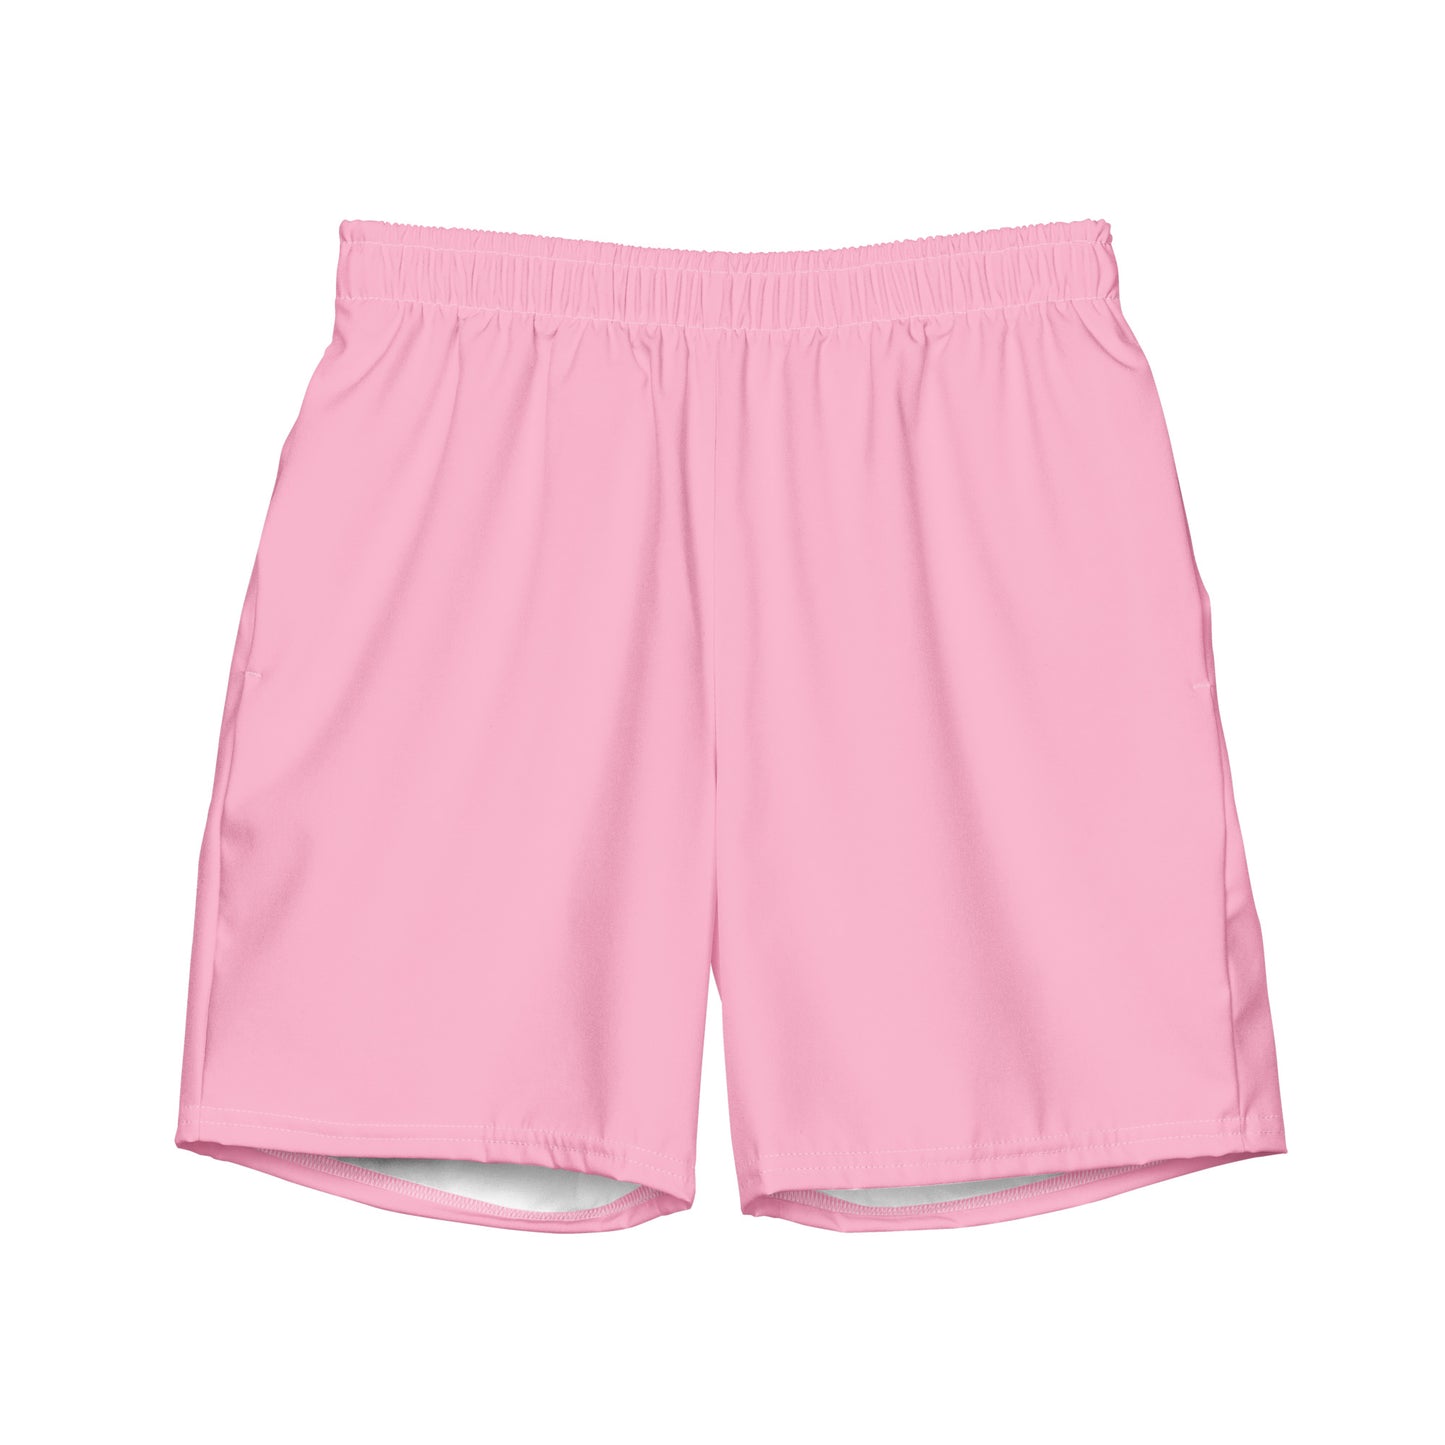 All-Over Print Recycled Swim Shorts: Cotton Candy Pink